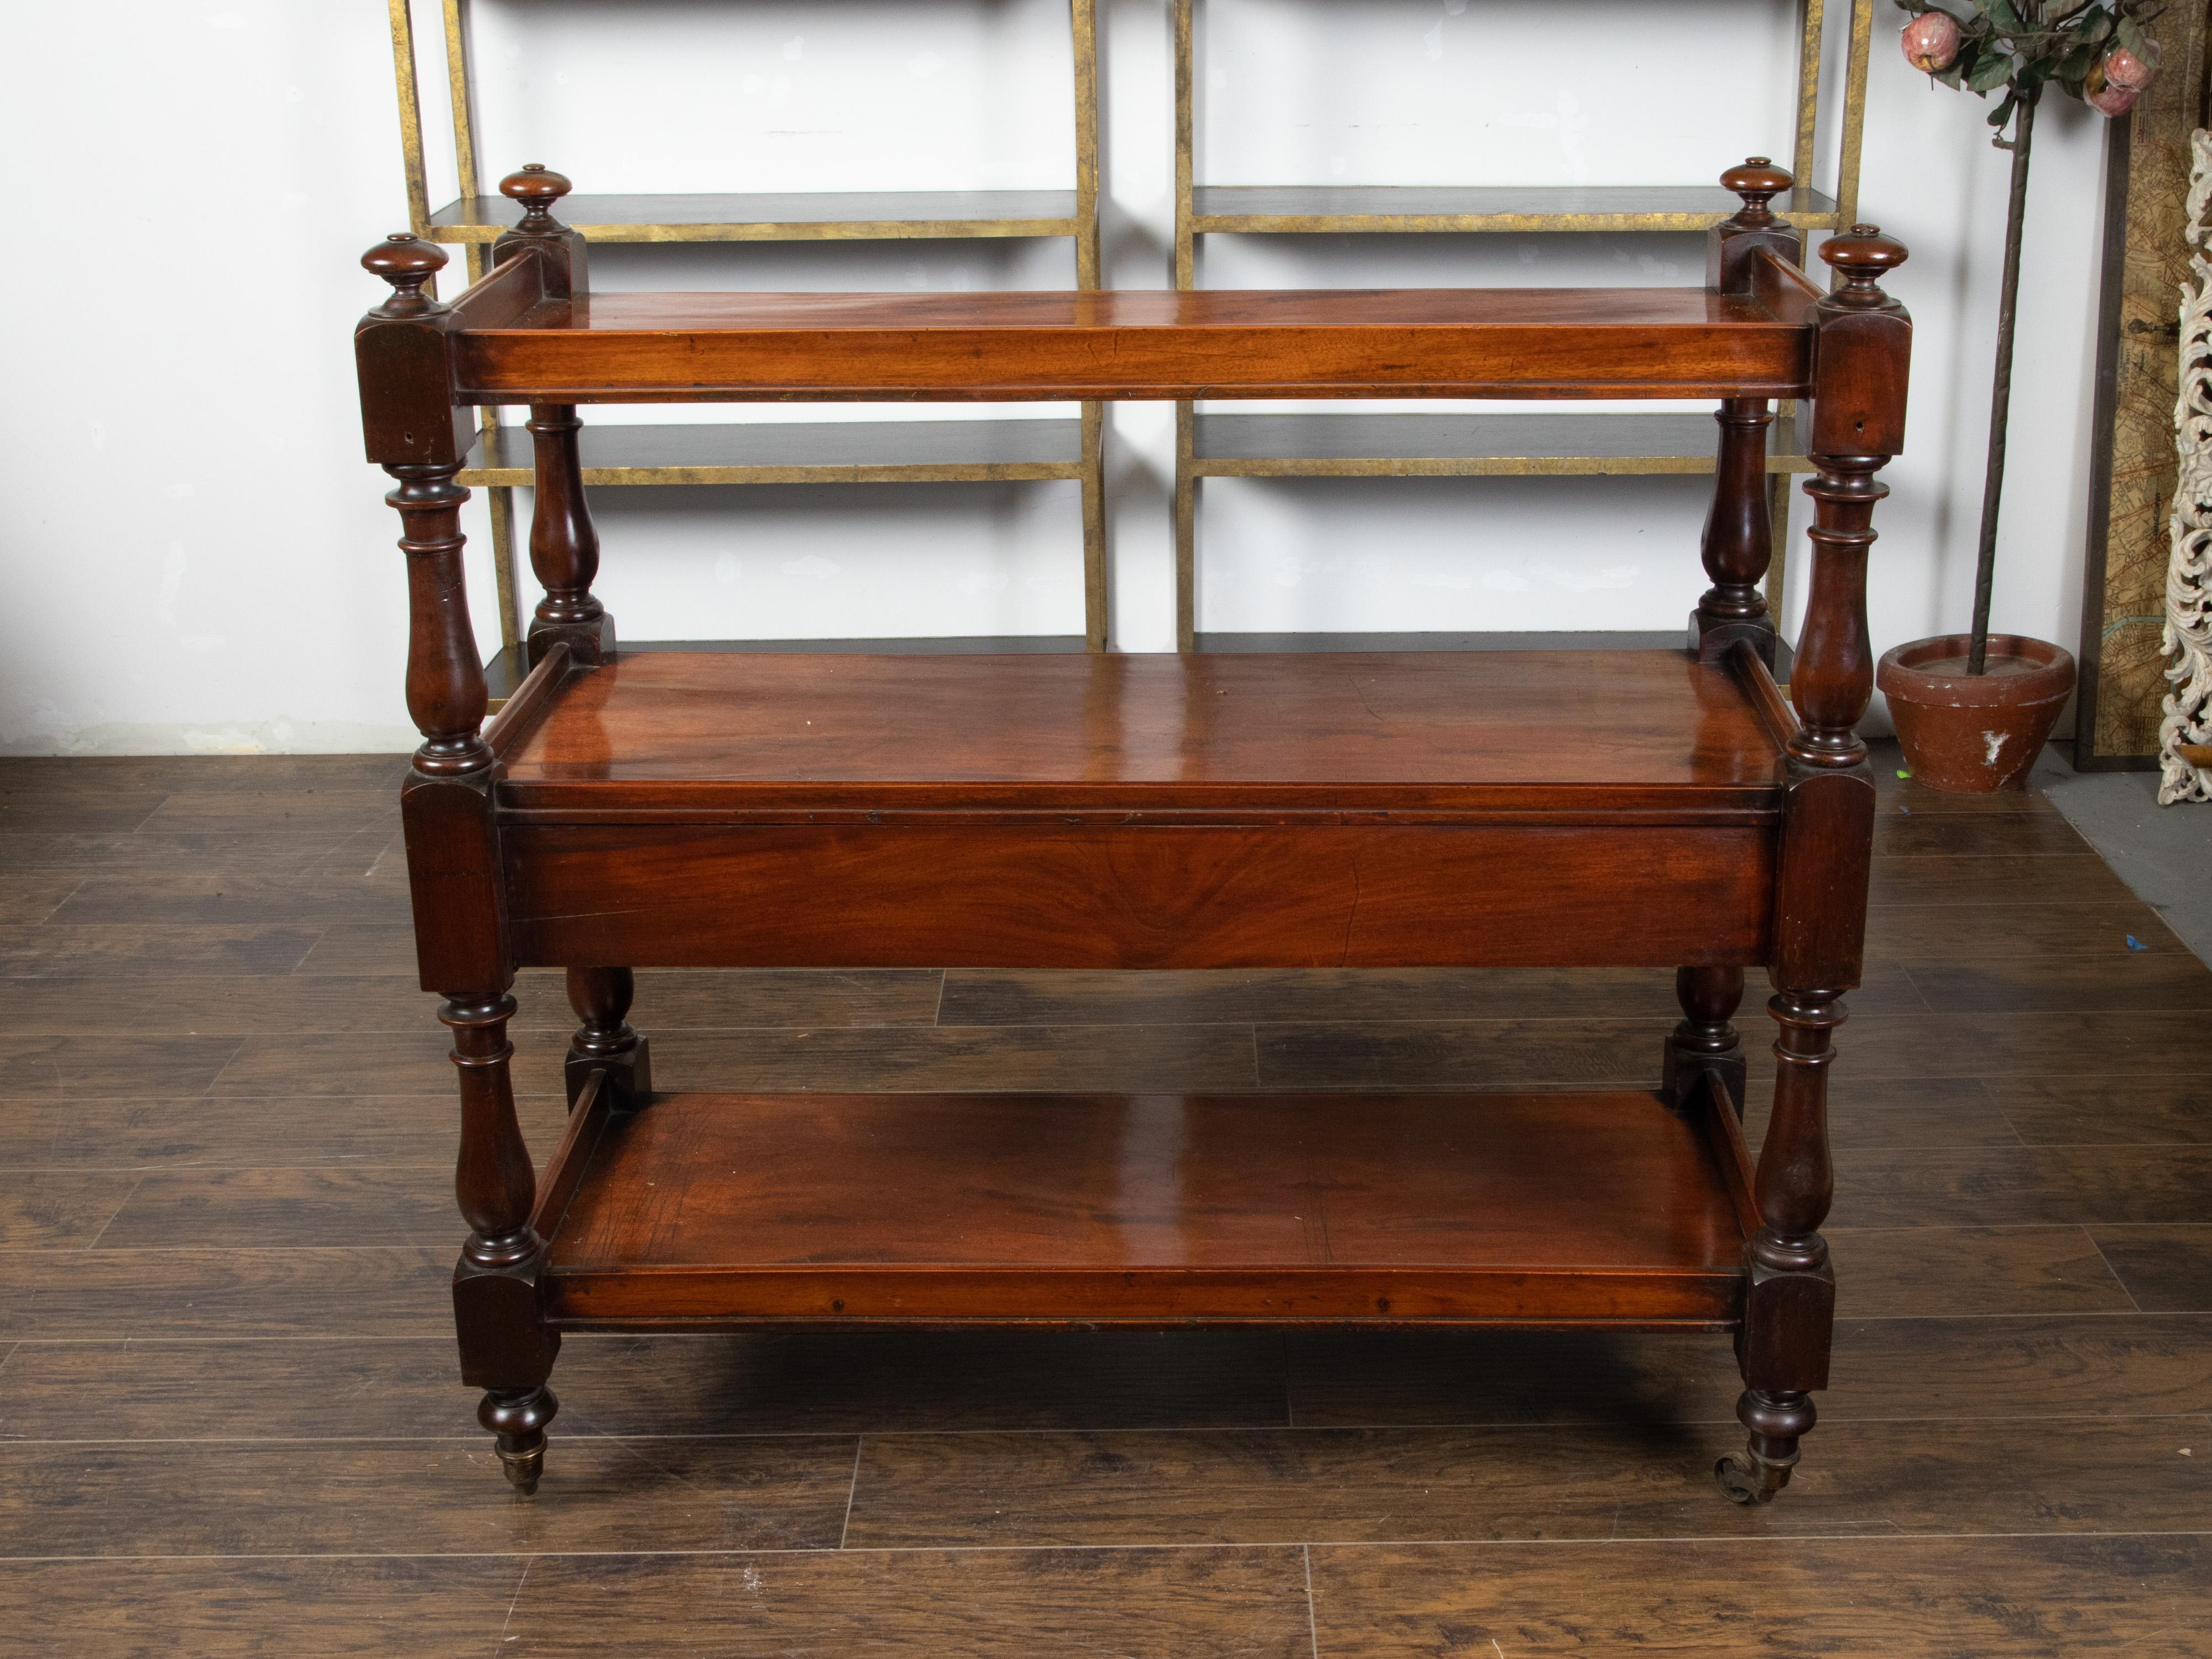 19th Century 1820s Mahogany English Trolley on Casters with Open Shelves and Two Drawers For Sale